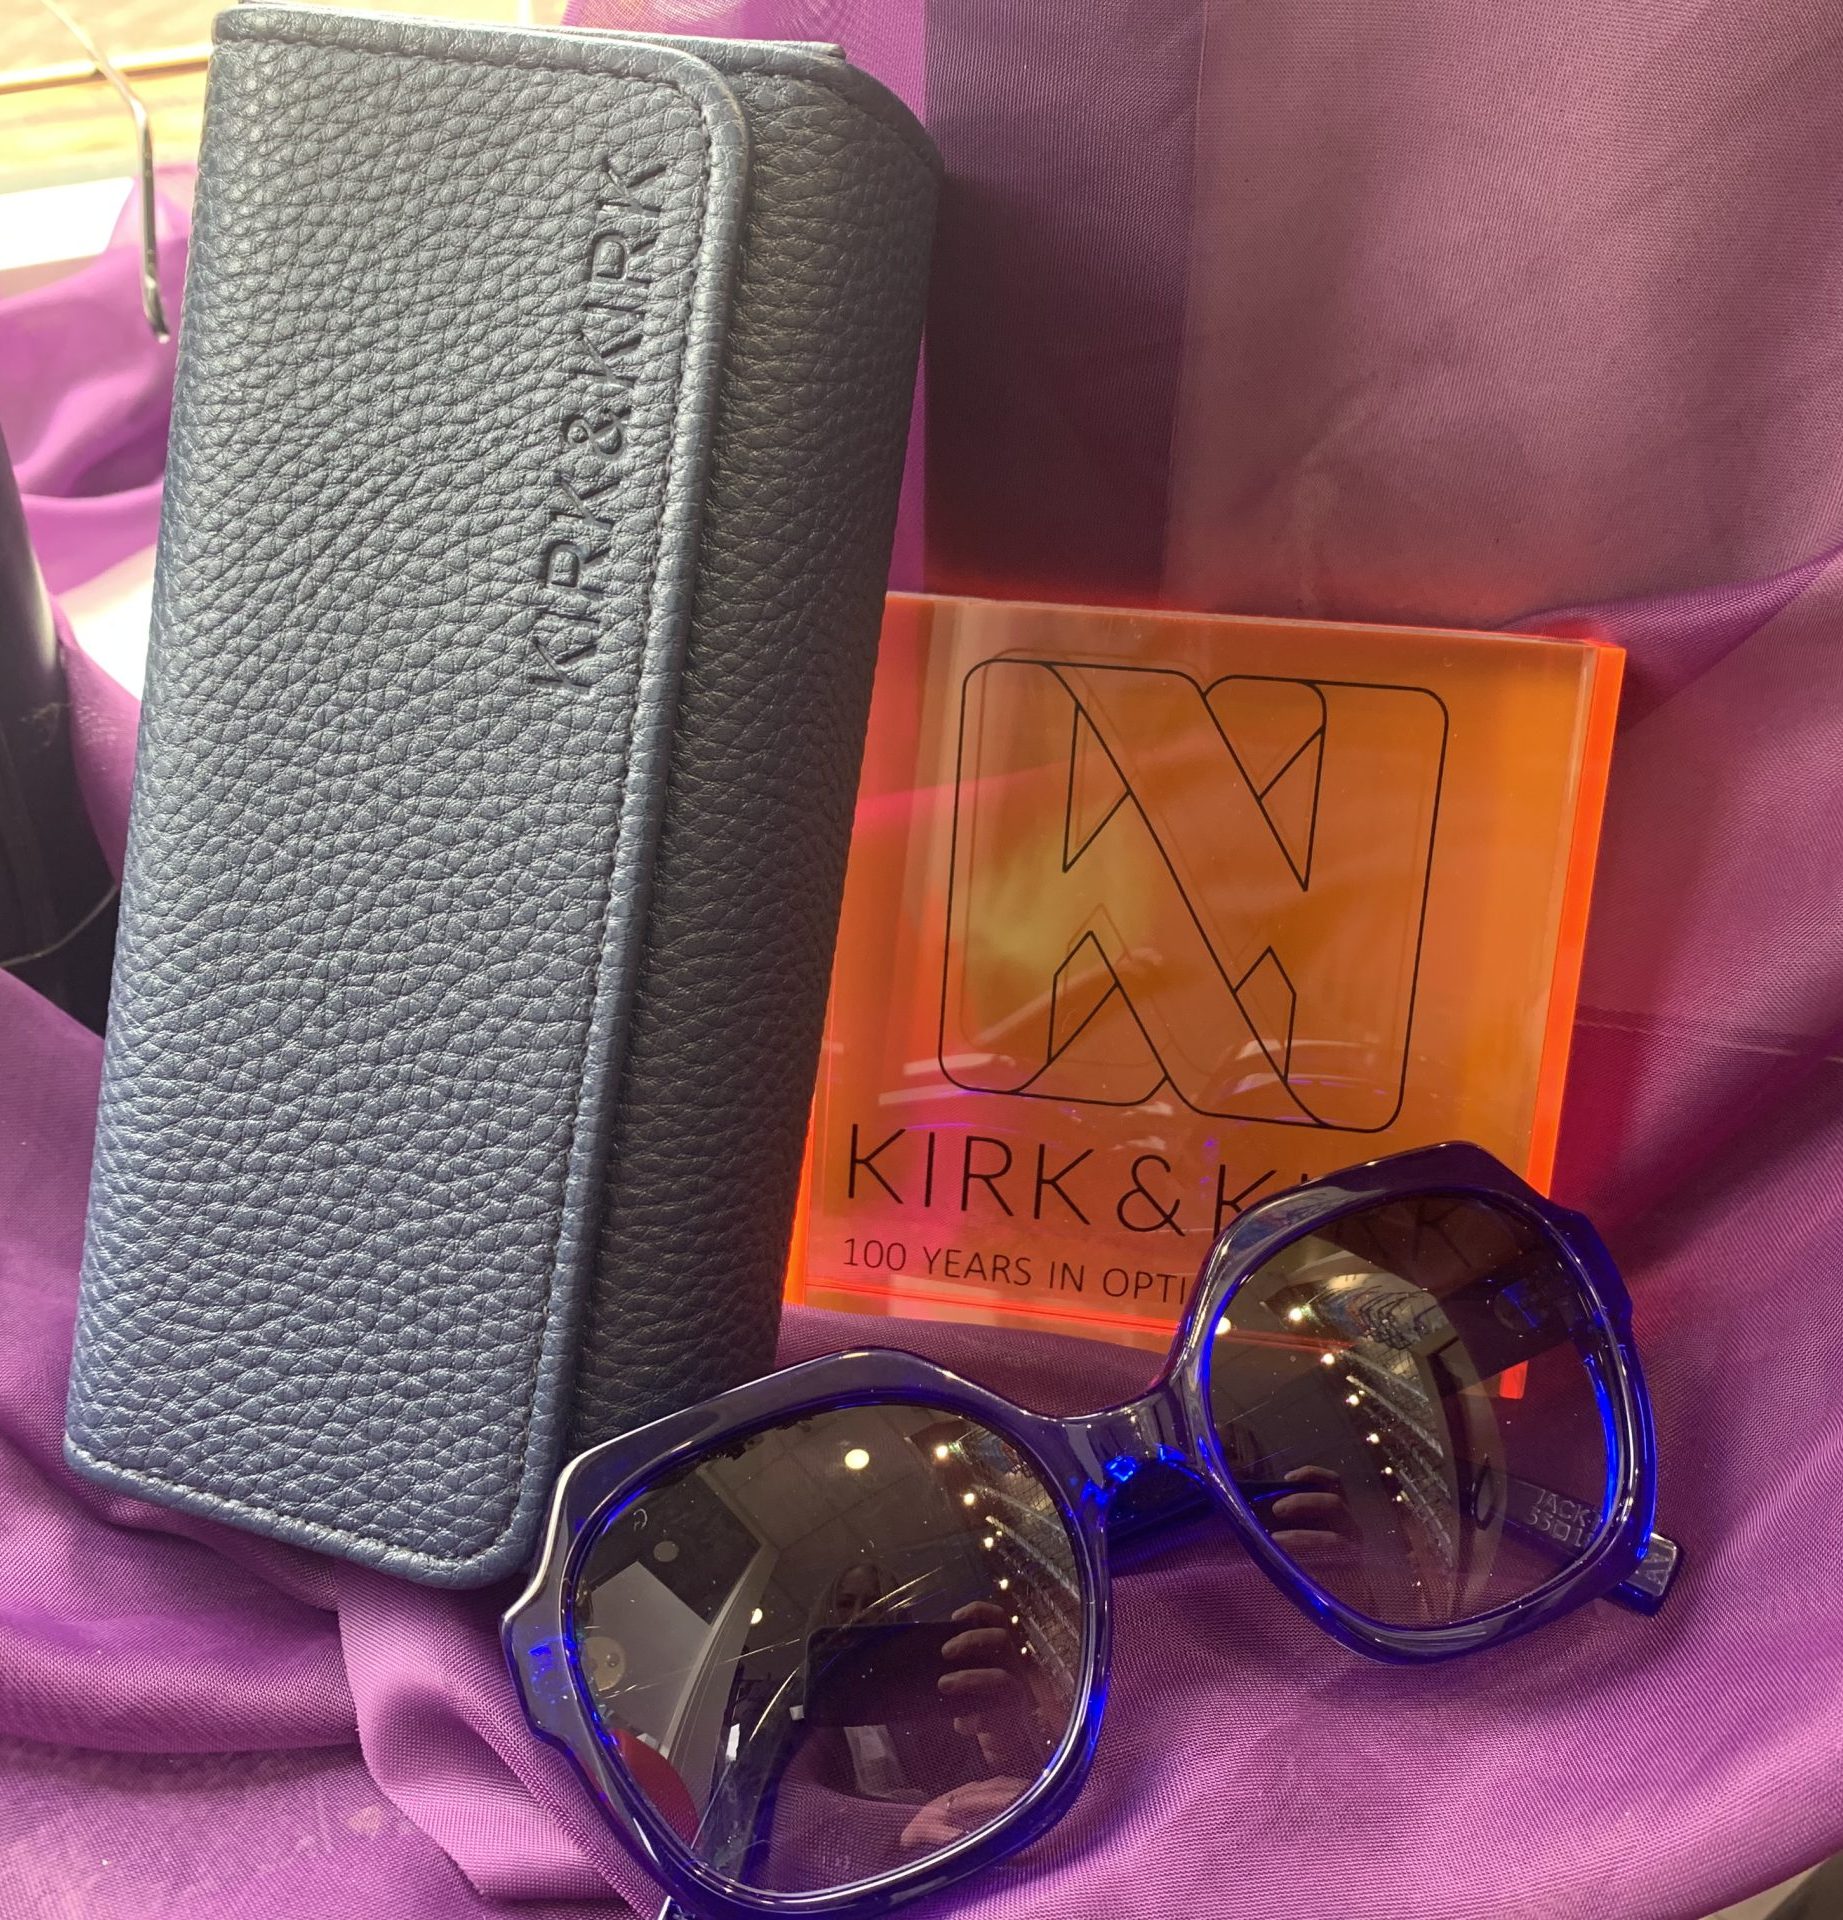 Win a pair of Kirk and Kirk sunglasses! – Molsom Opticians